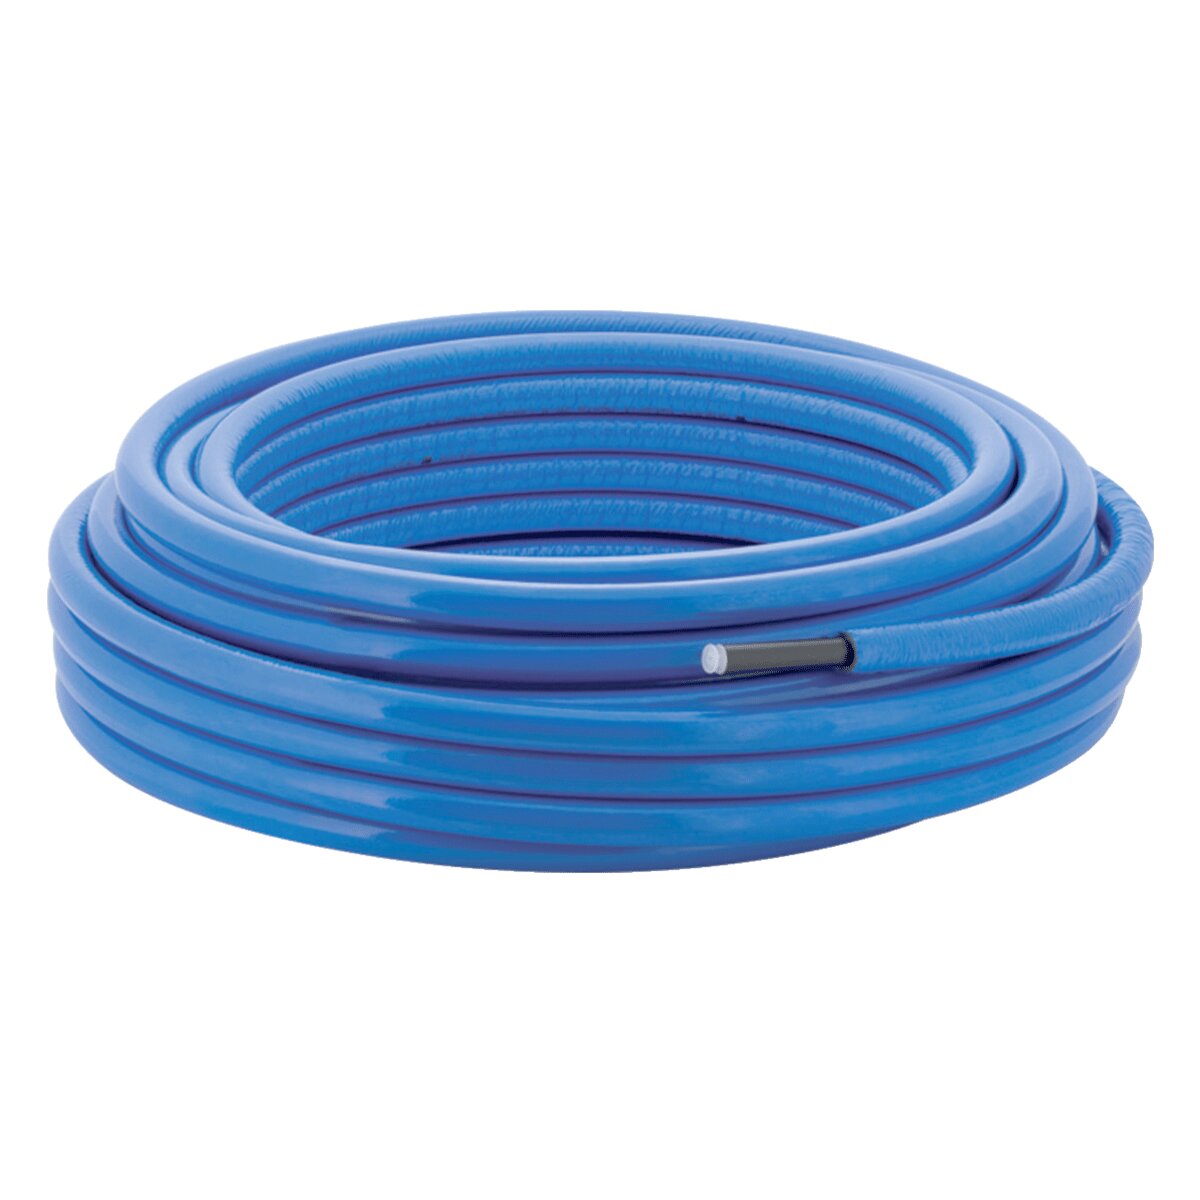 Geberit Mepla multilayer pipe Ø20x6 mm with 6 mm insulating sheath - For domestic water